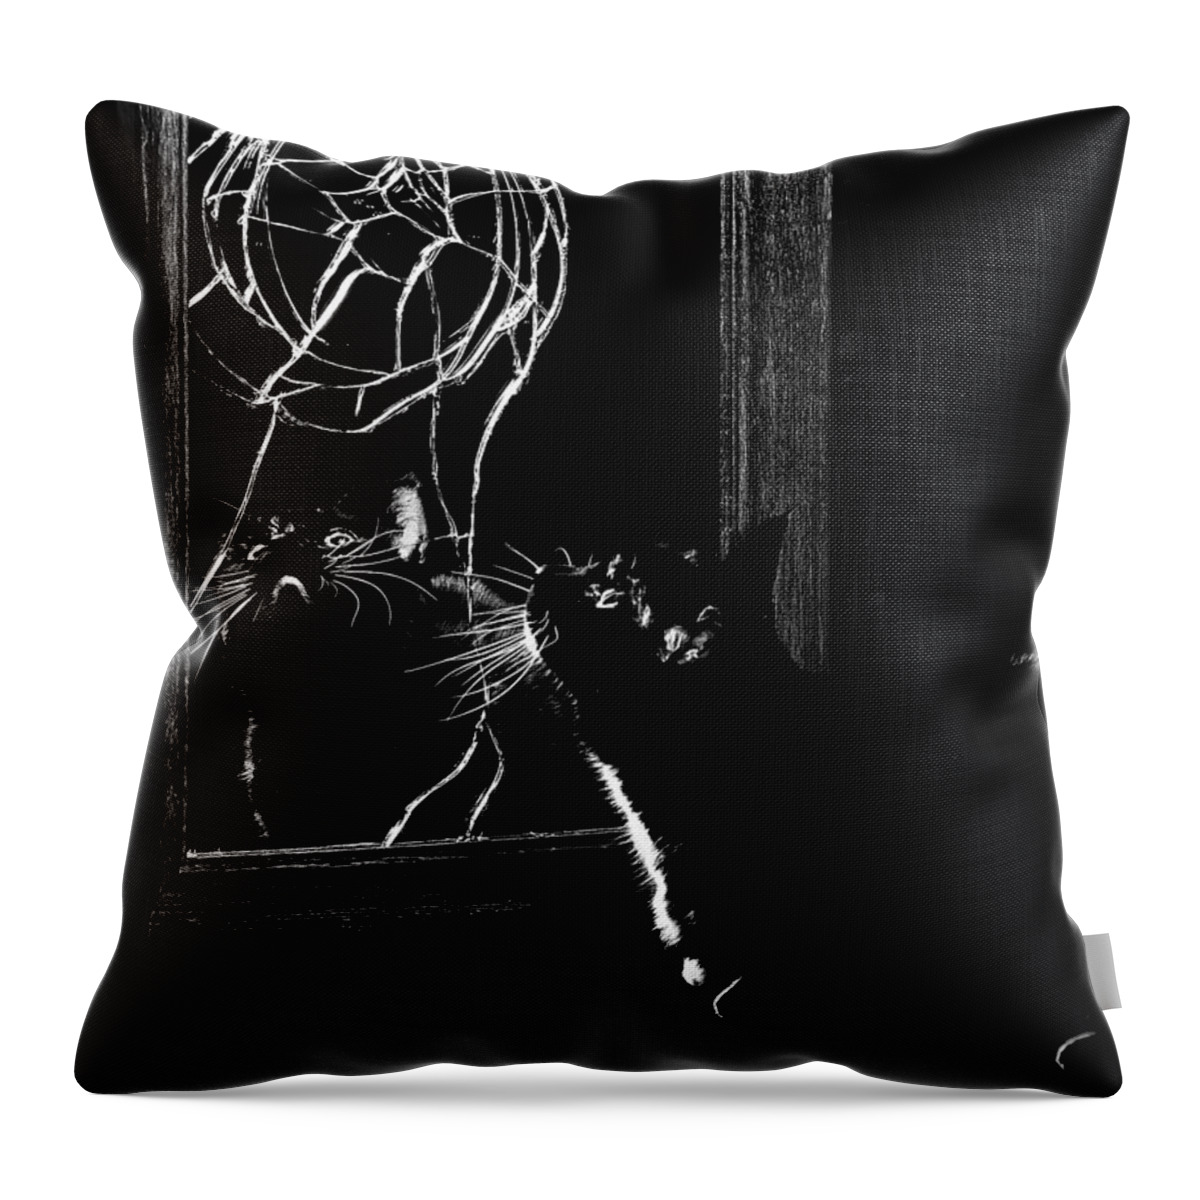 Unlucky Throw Pillow featuring the photograph Unlucky by Rick Mosher